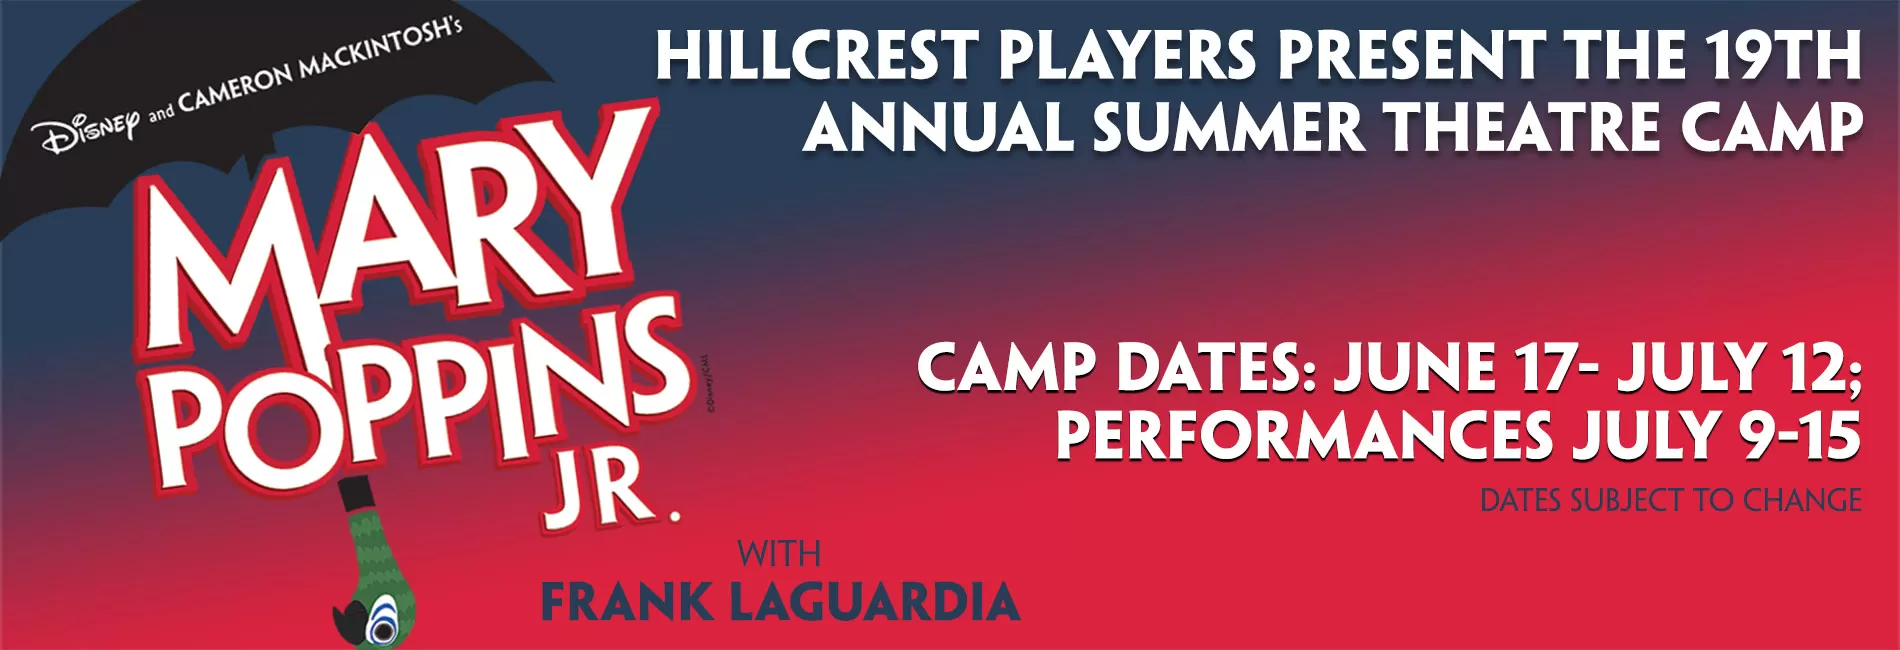 Hillcrest Players Camp with Frank Laguardia